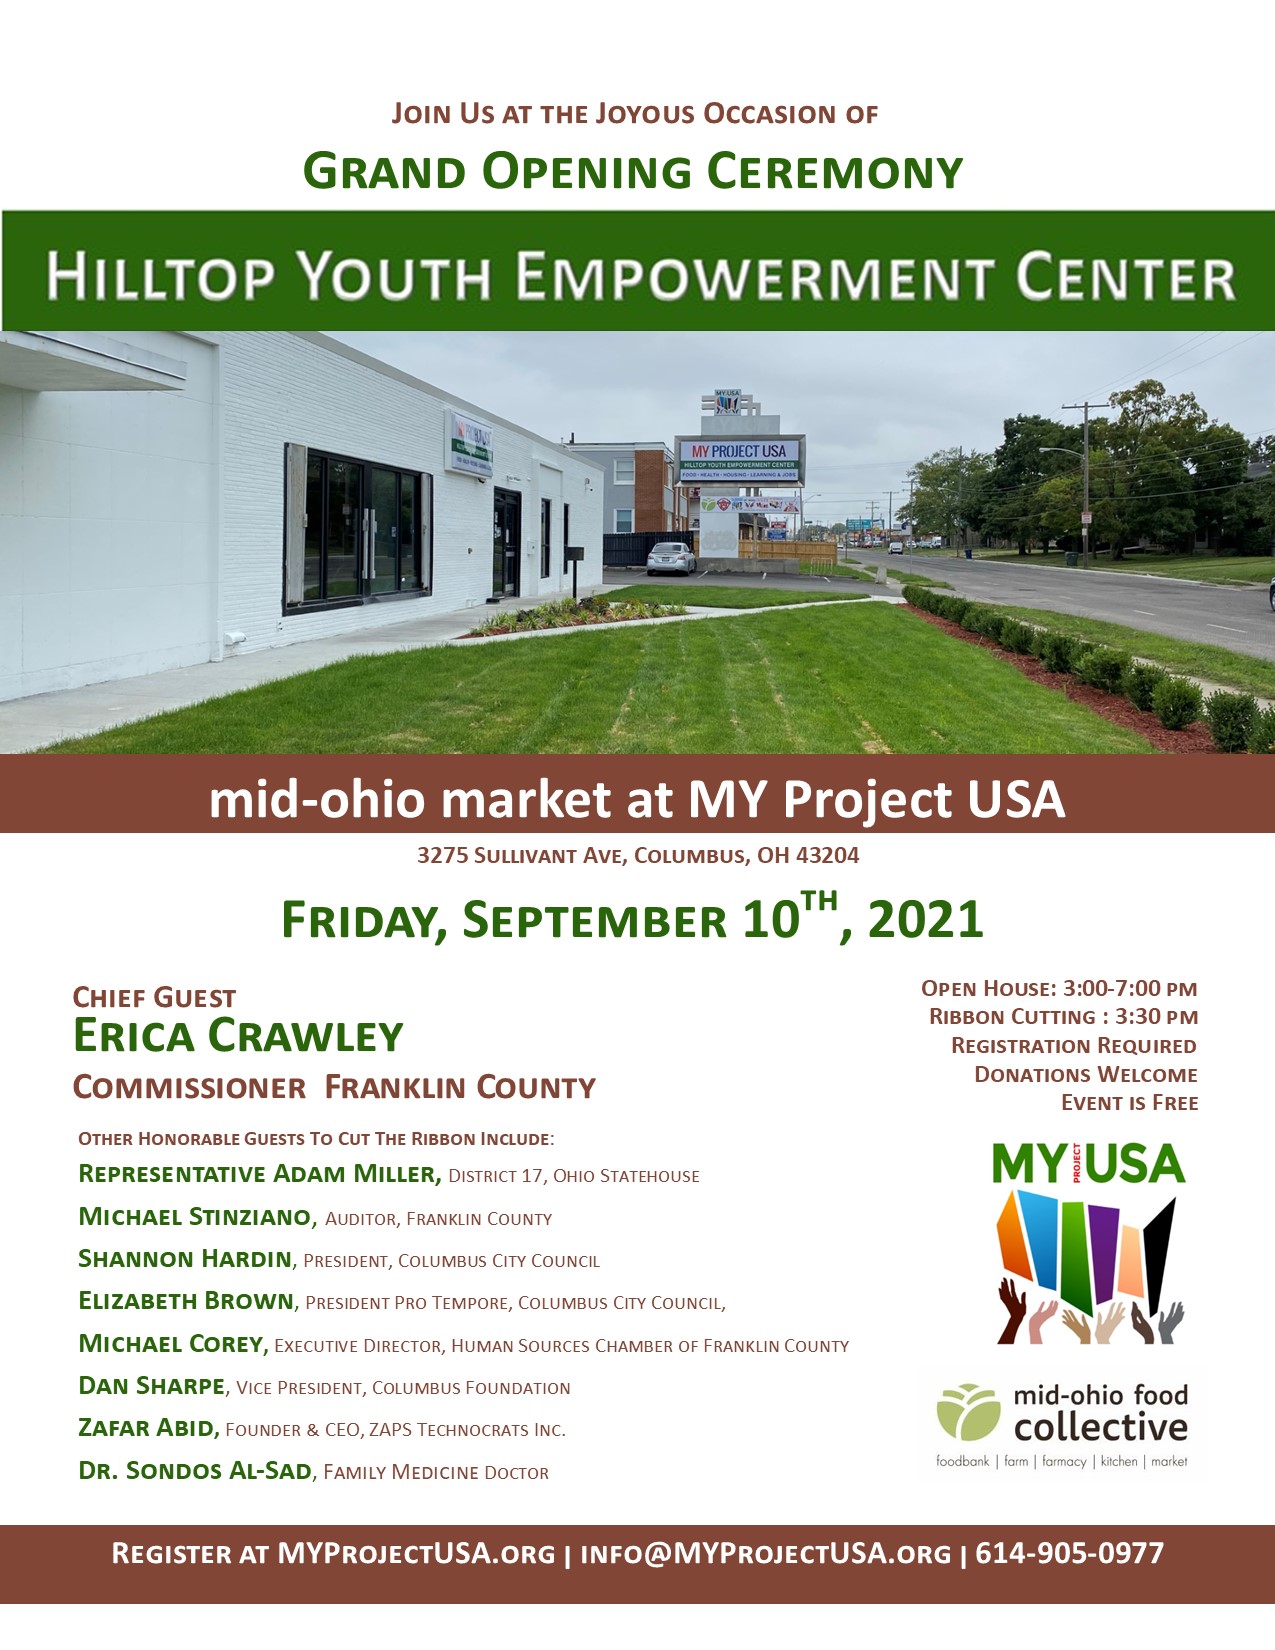 Grand Opening Ceremony of Hilltop Youth Empowerment Center